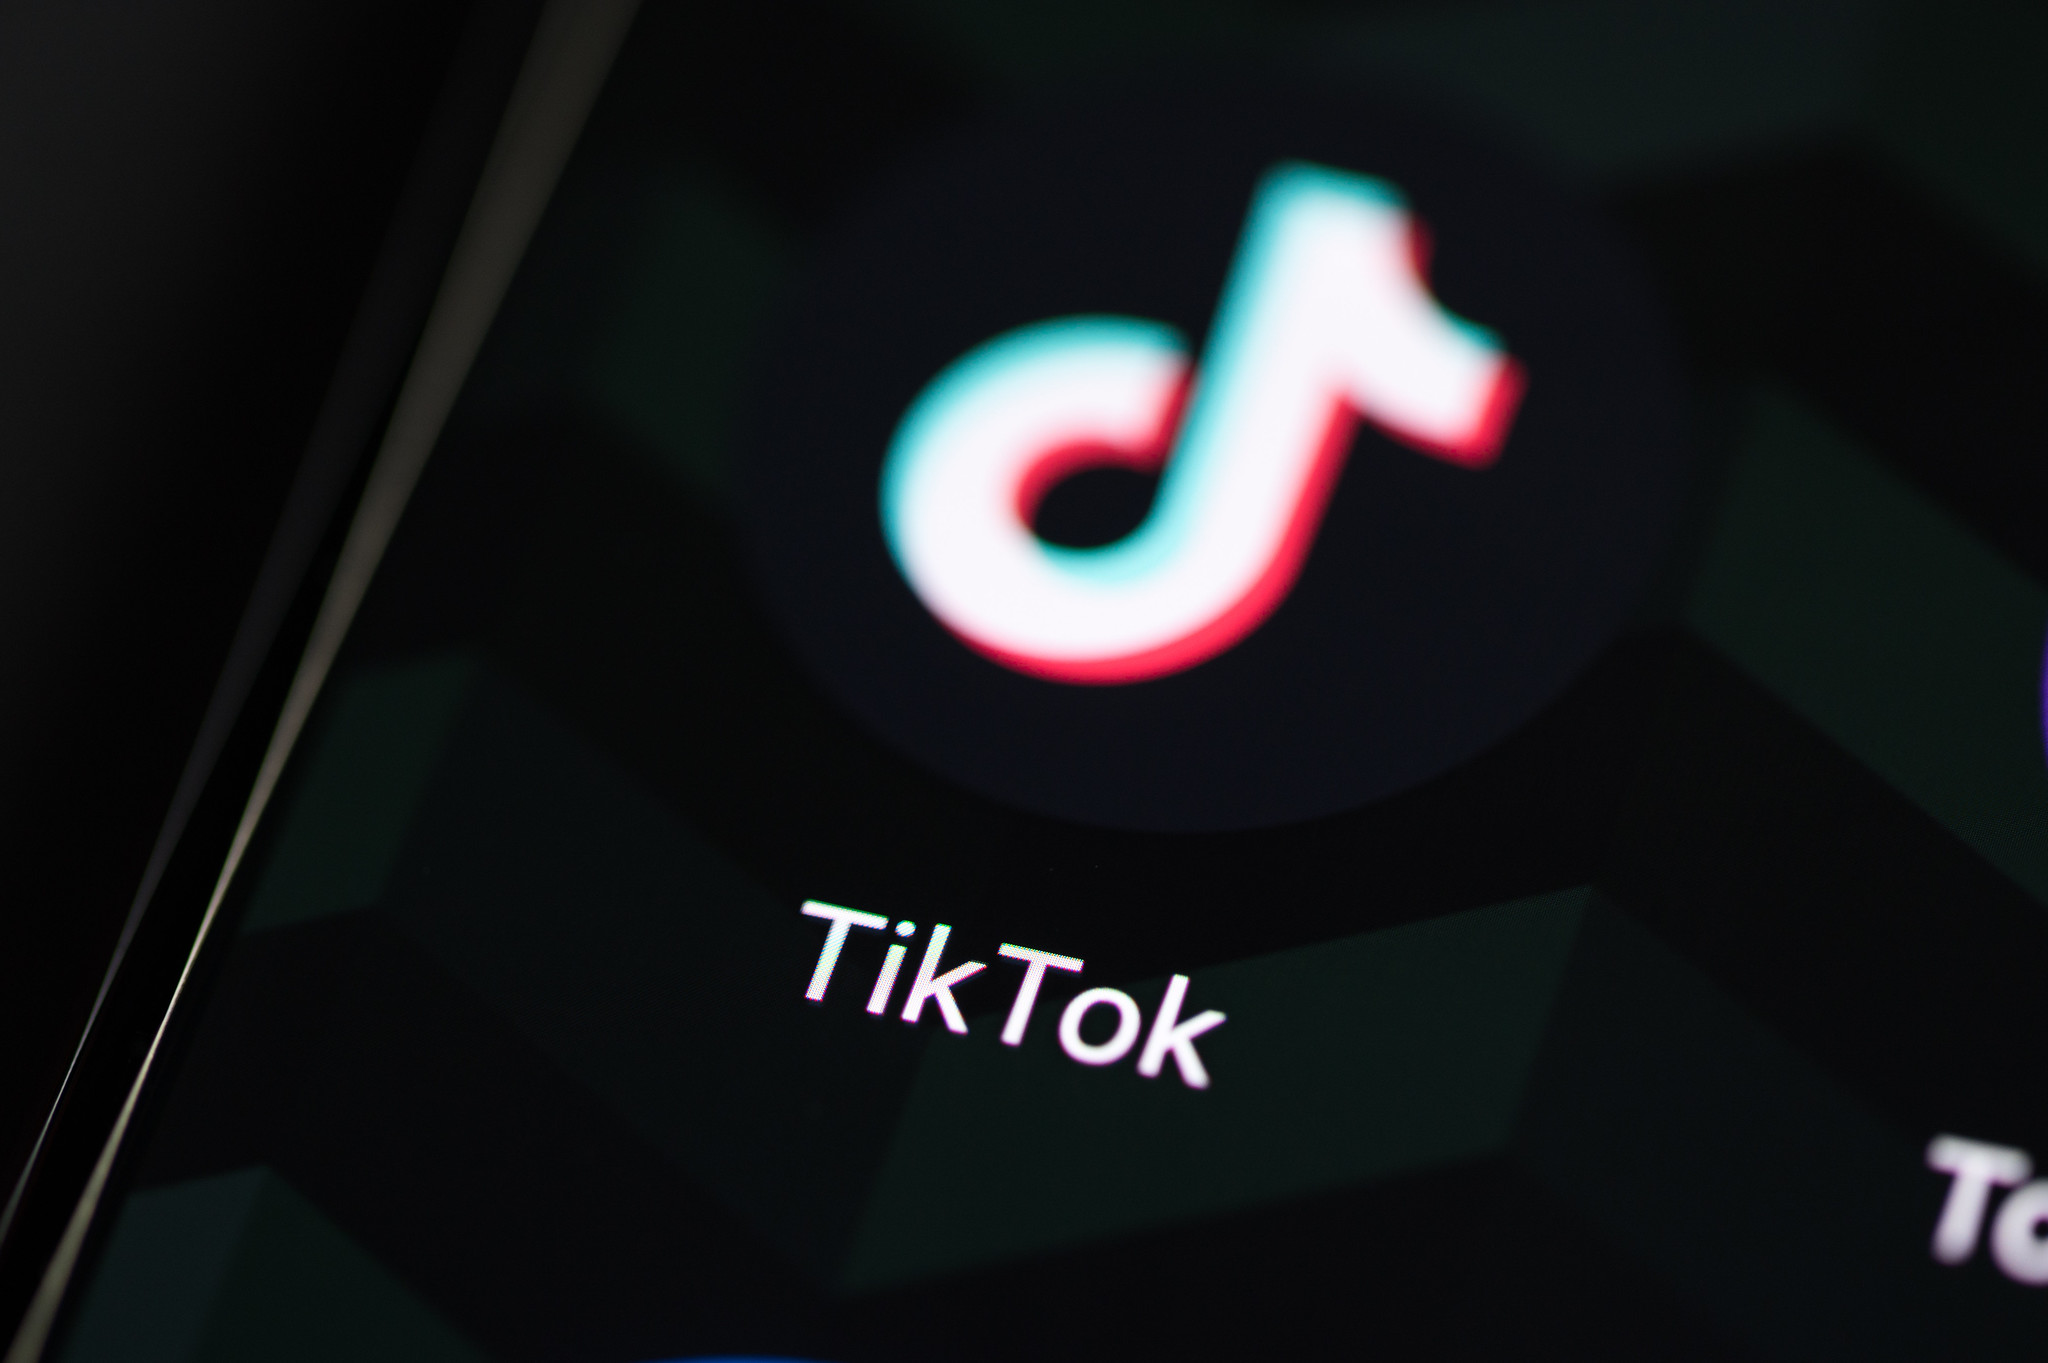 GIPHY and TikTok form a partnership to deliver new GIFs